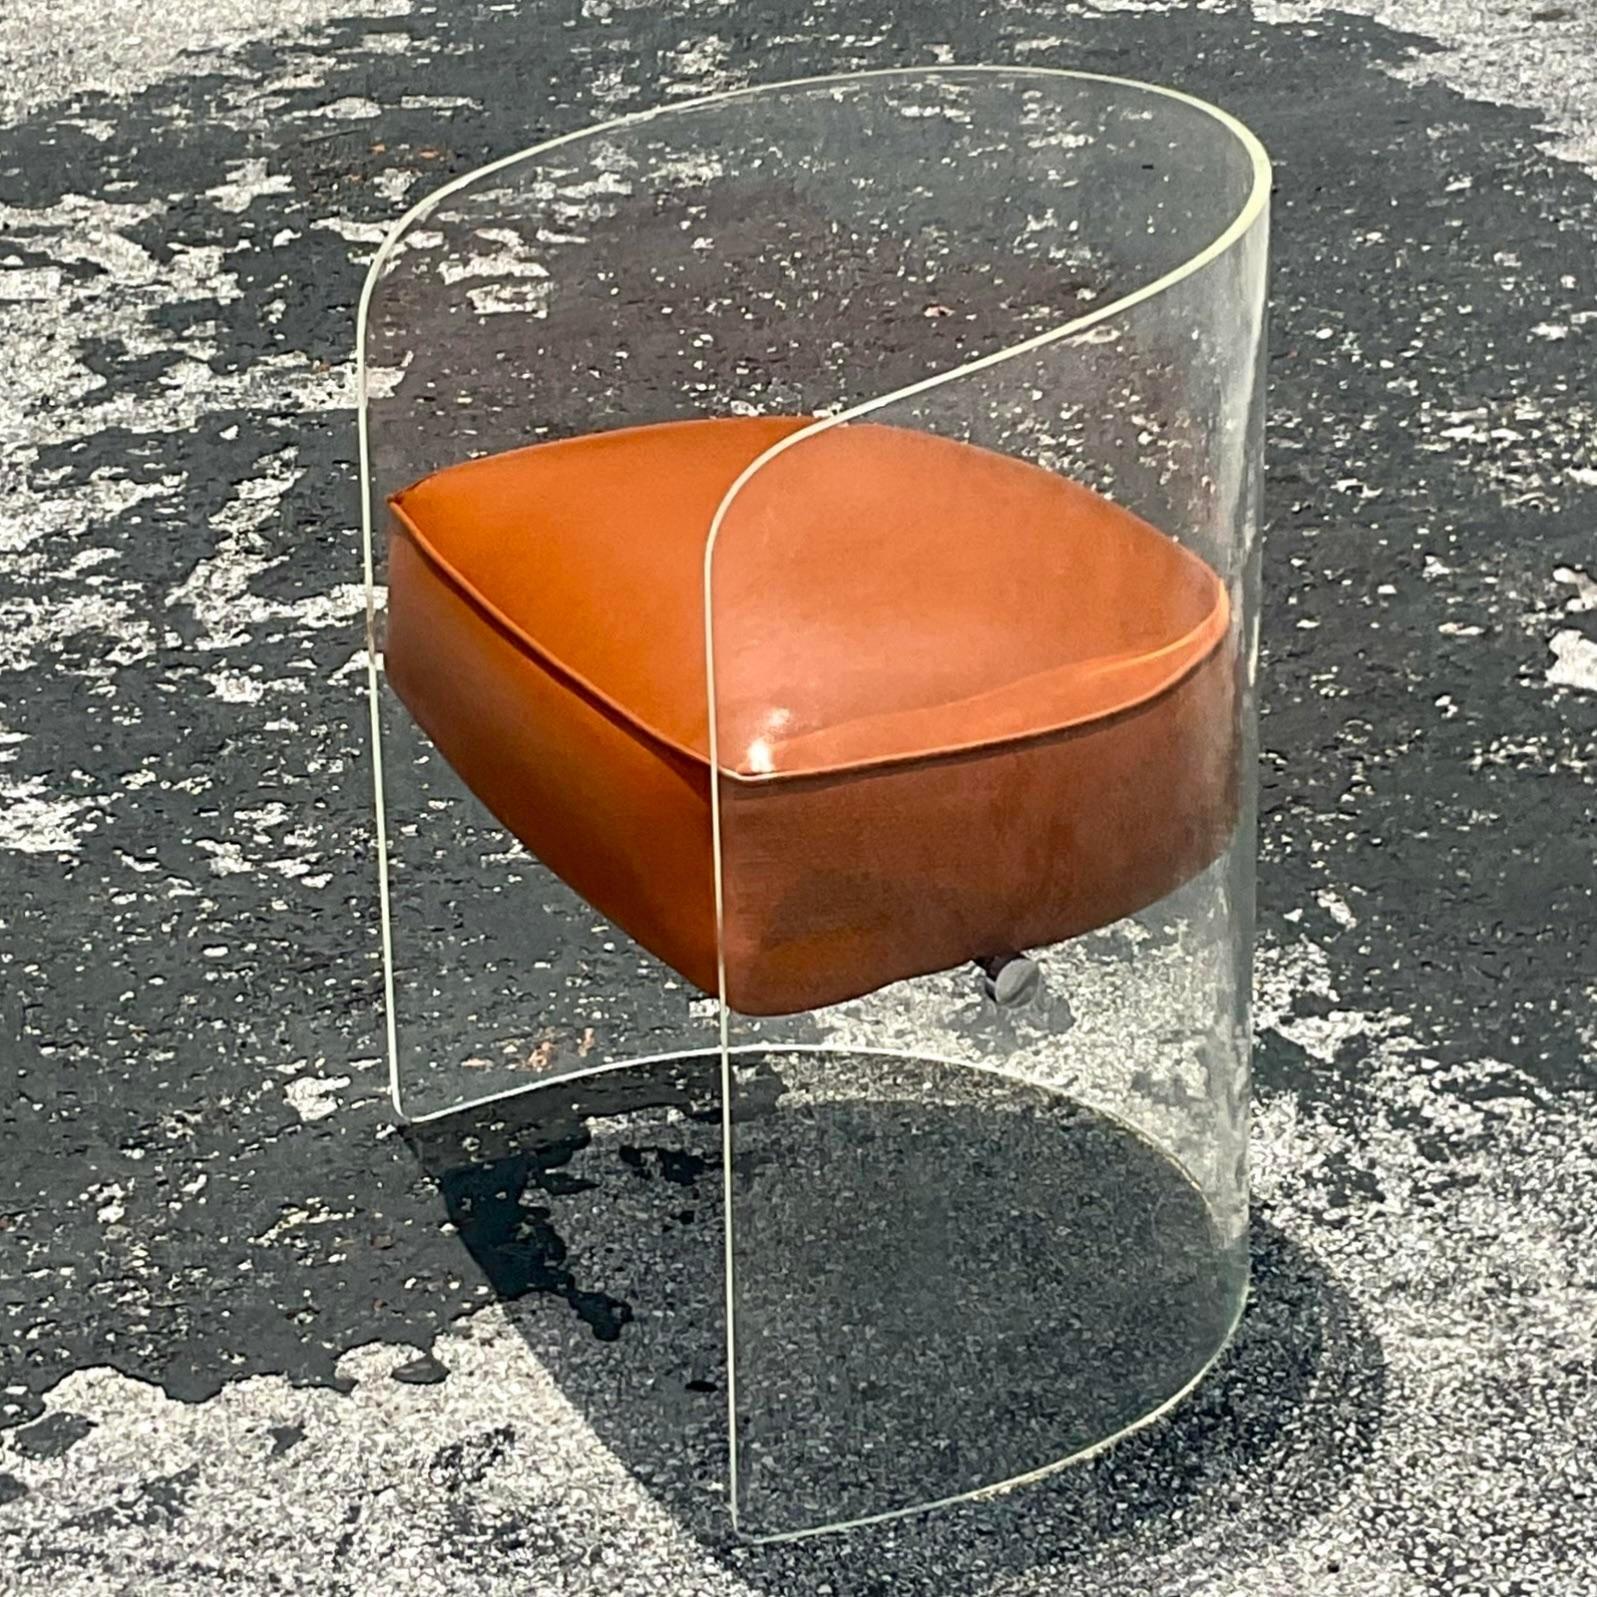 A fabulous vintage Boho Tub chair. A chic lucite body with a floating seat. Newly reupholstered in a caramel leather. Chrome hardware. Done in the manner of Vladimir Kagan. Acquired from a Palm Beach estate.